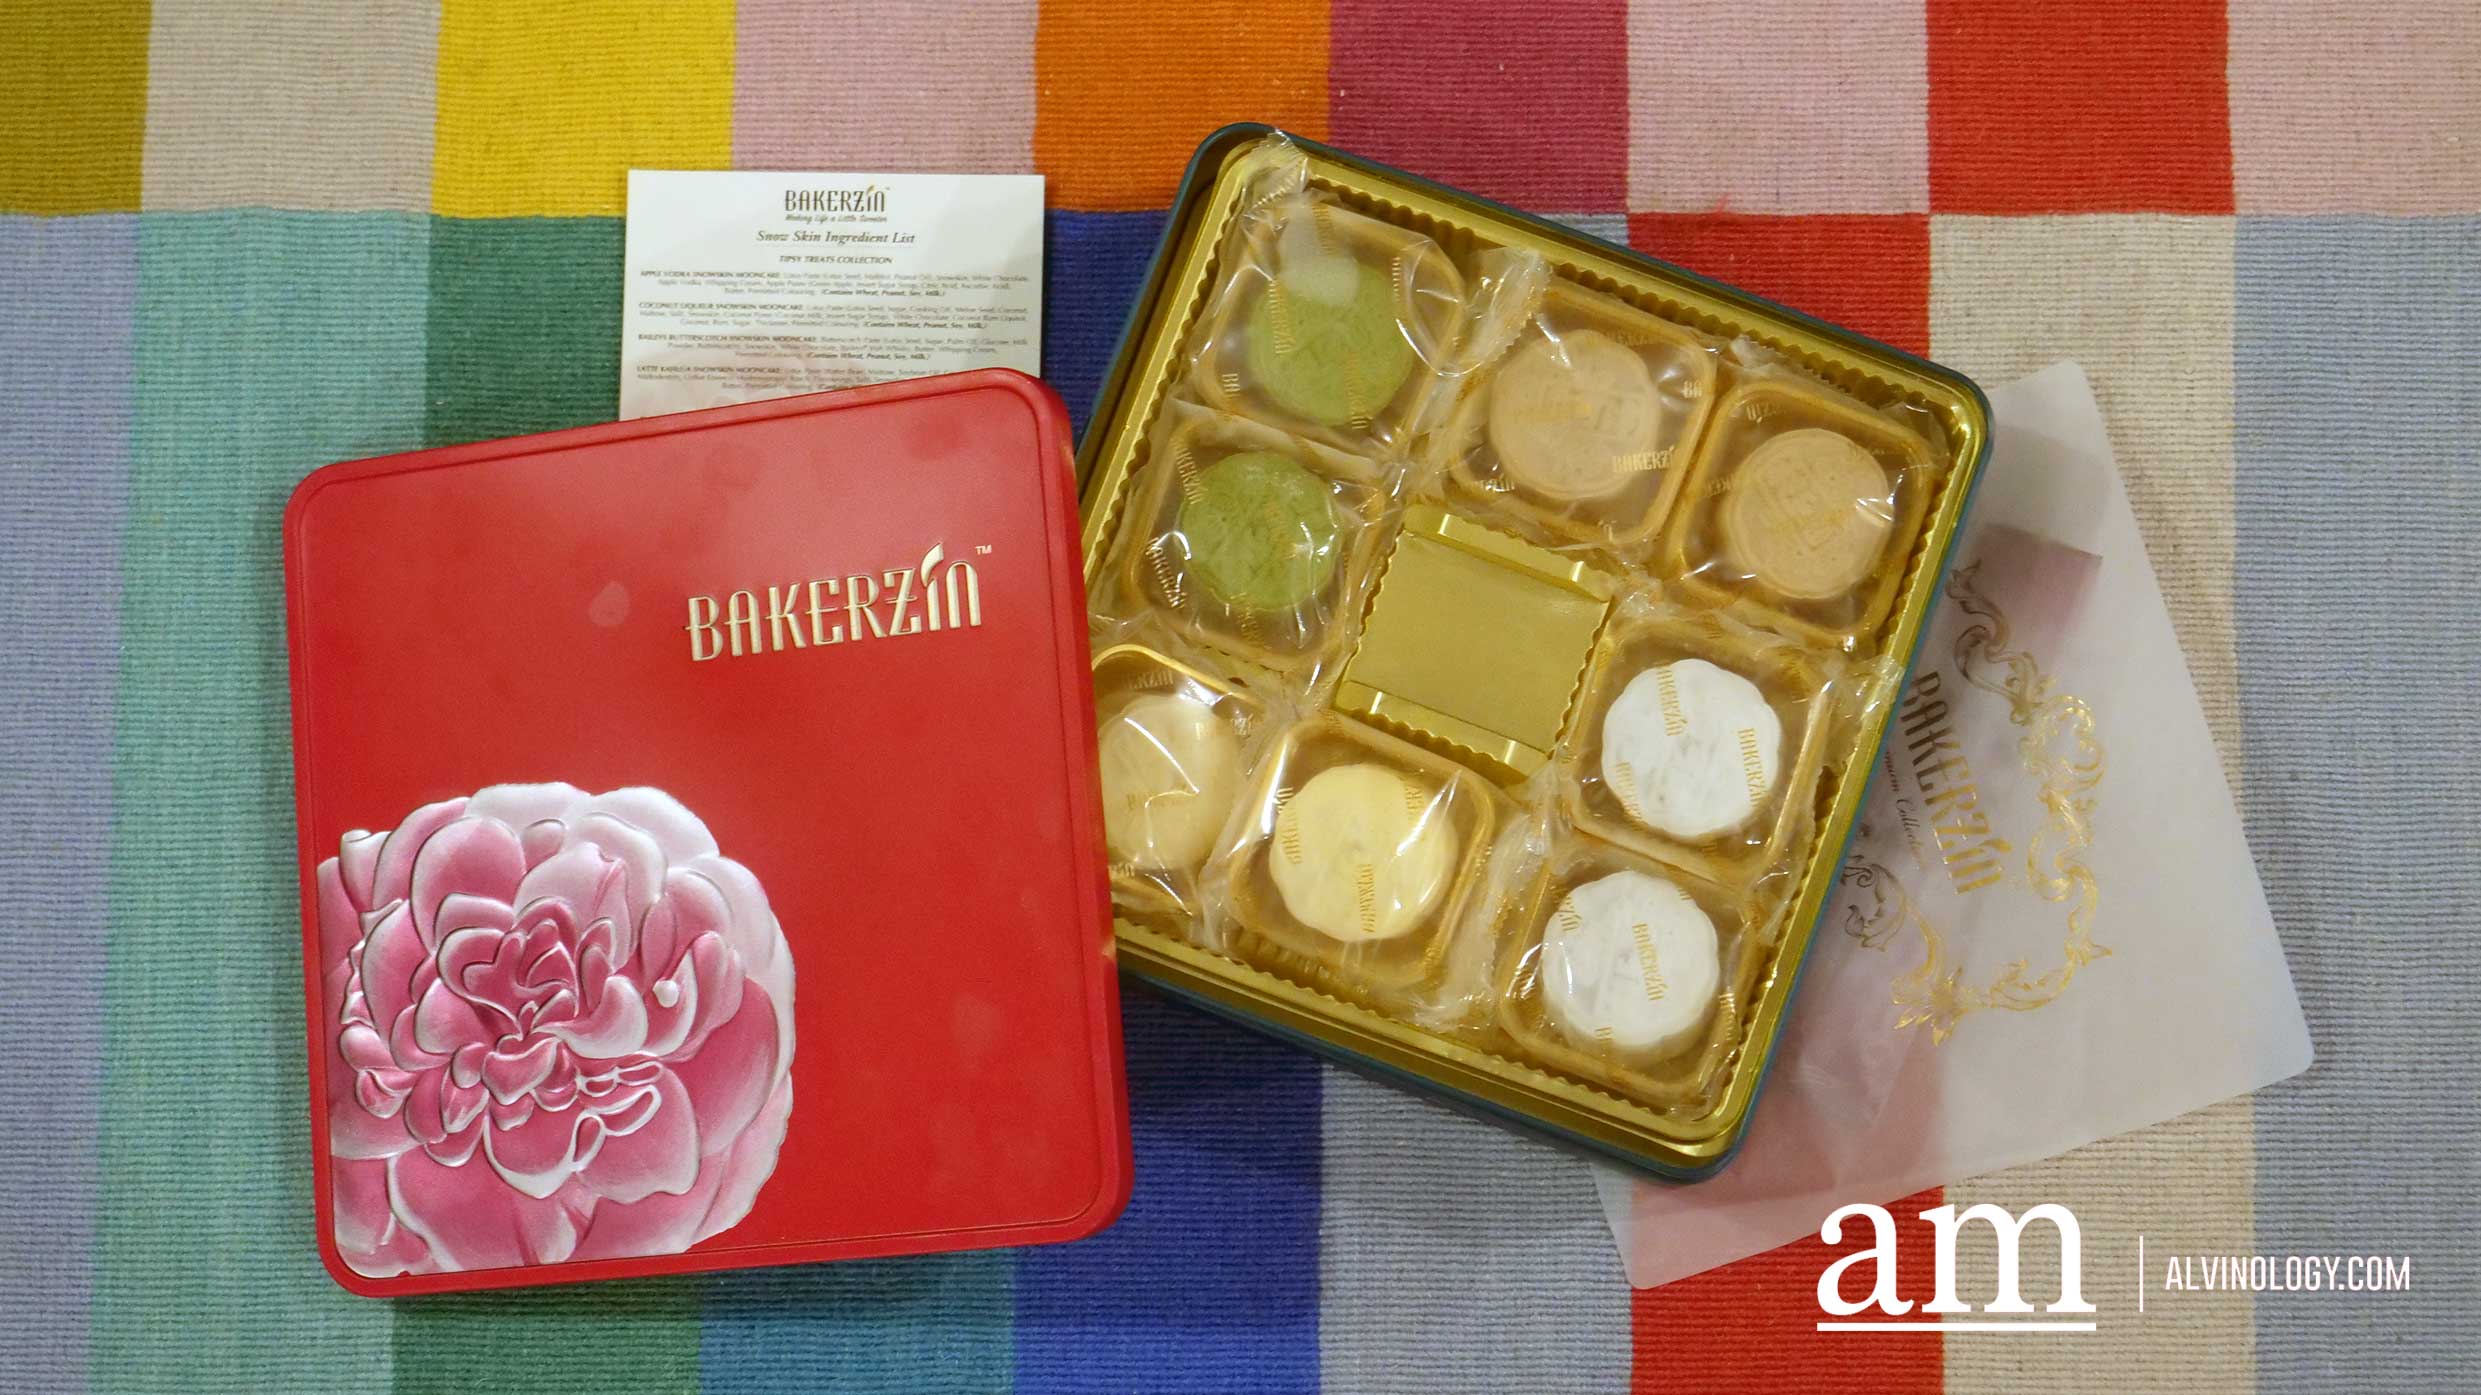 All the Fun and Unique Mooncakes for the Mid-Autumn Festival in Singapore - Alvinology